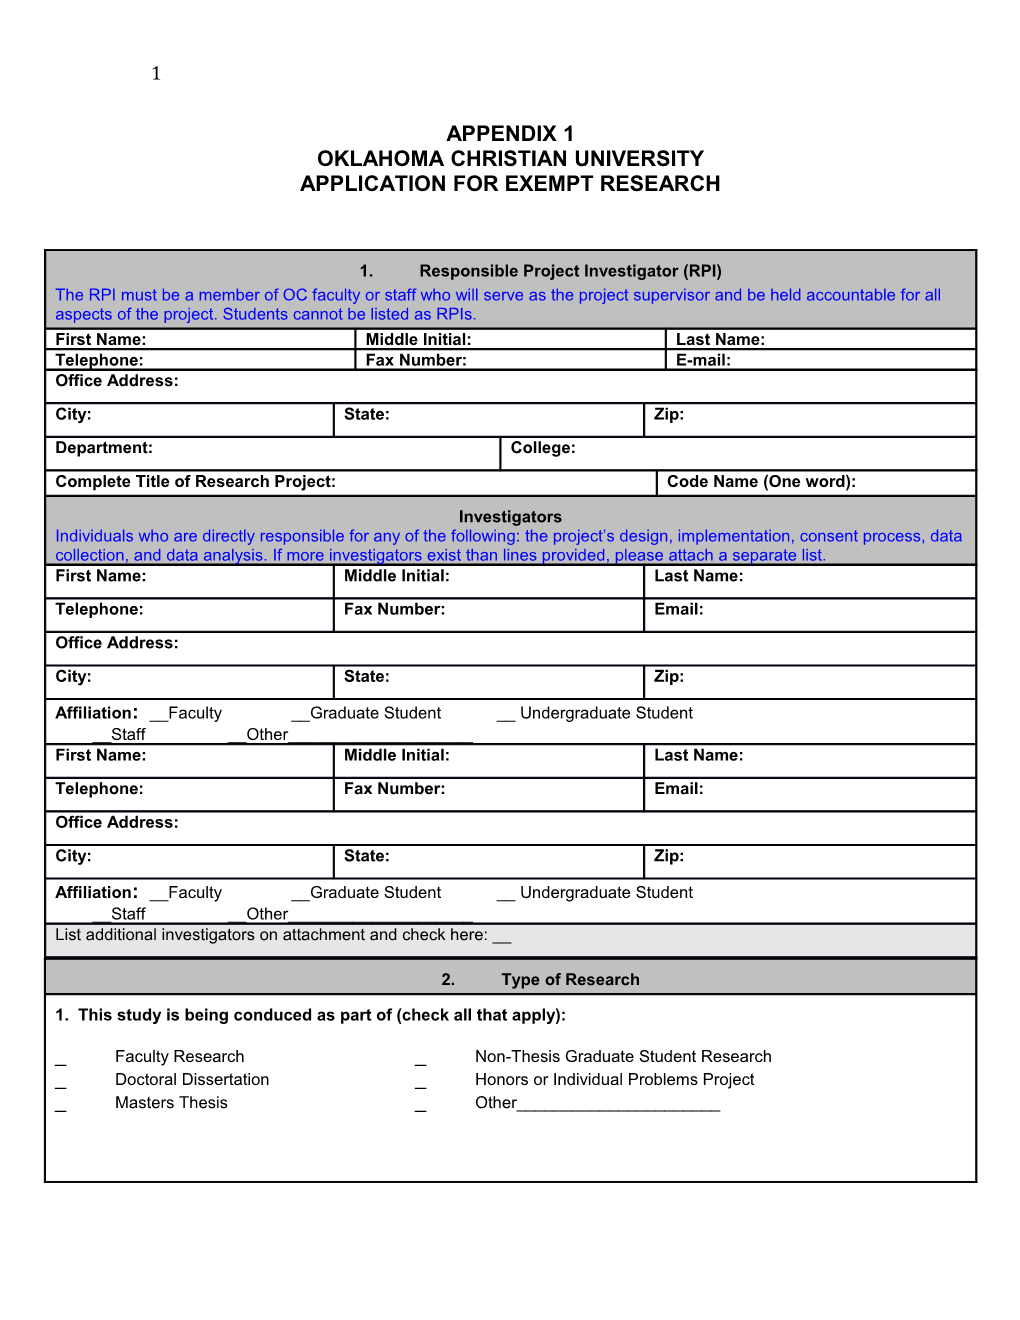 Application for Exempt Research